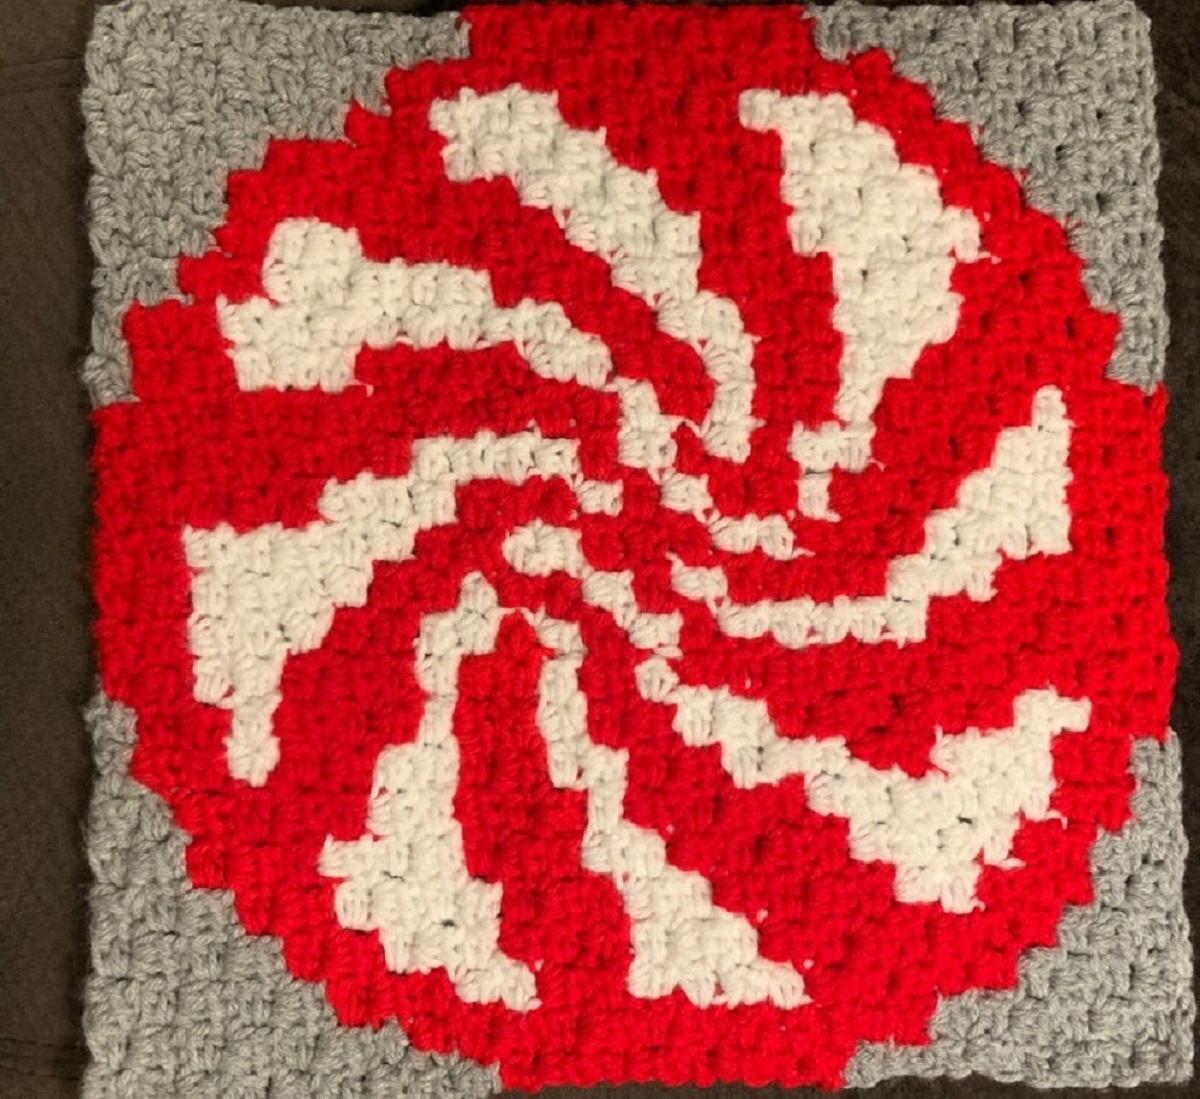 A gray crochet cushion cover with a large red circle with red swirls in the center on a dark wooden background.